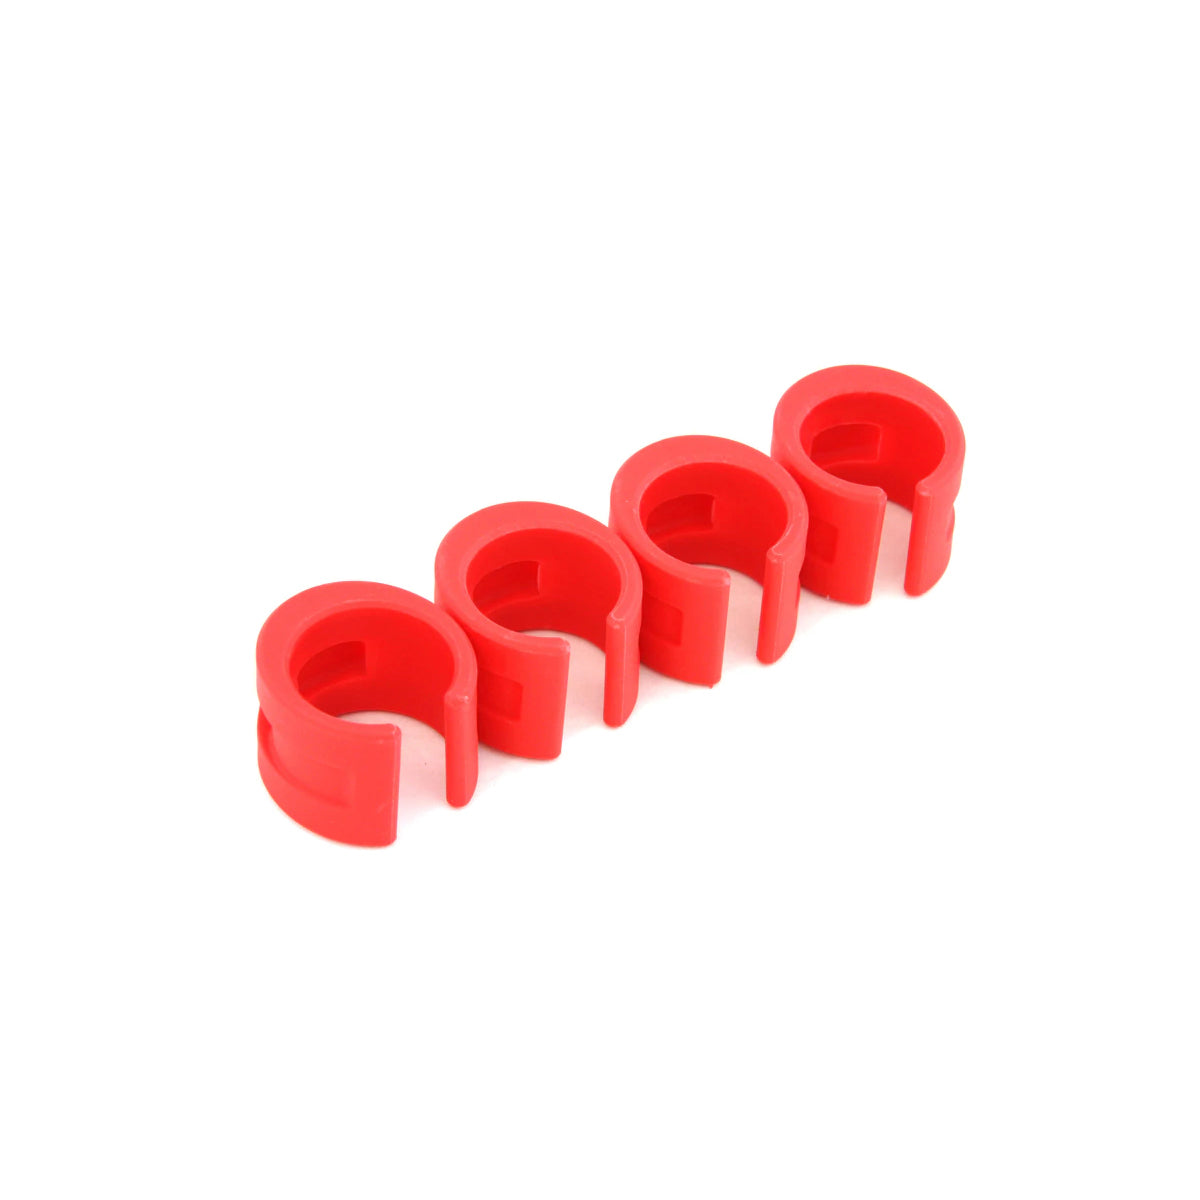 DaBomb Chain Protector Ring - Set of 4 - Red